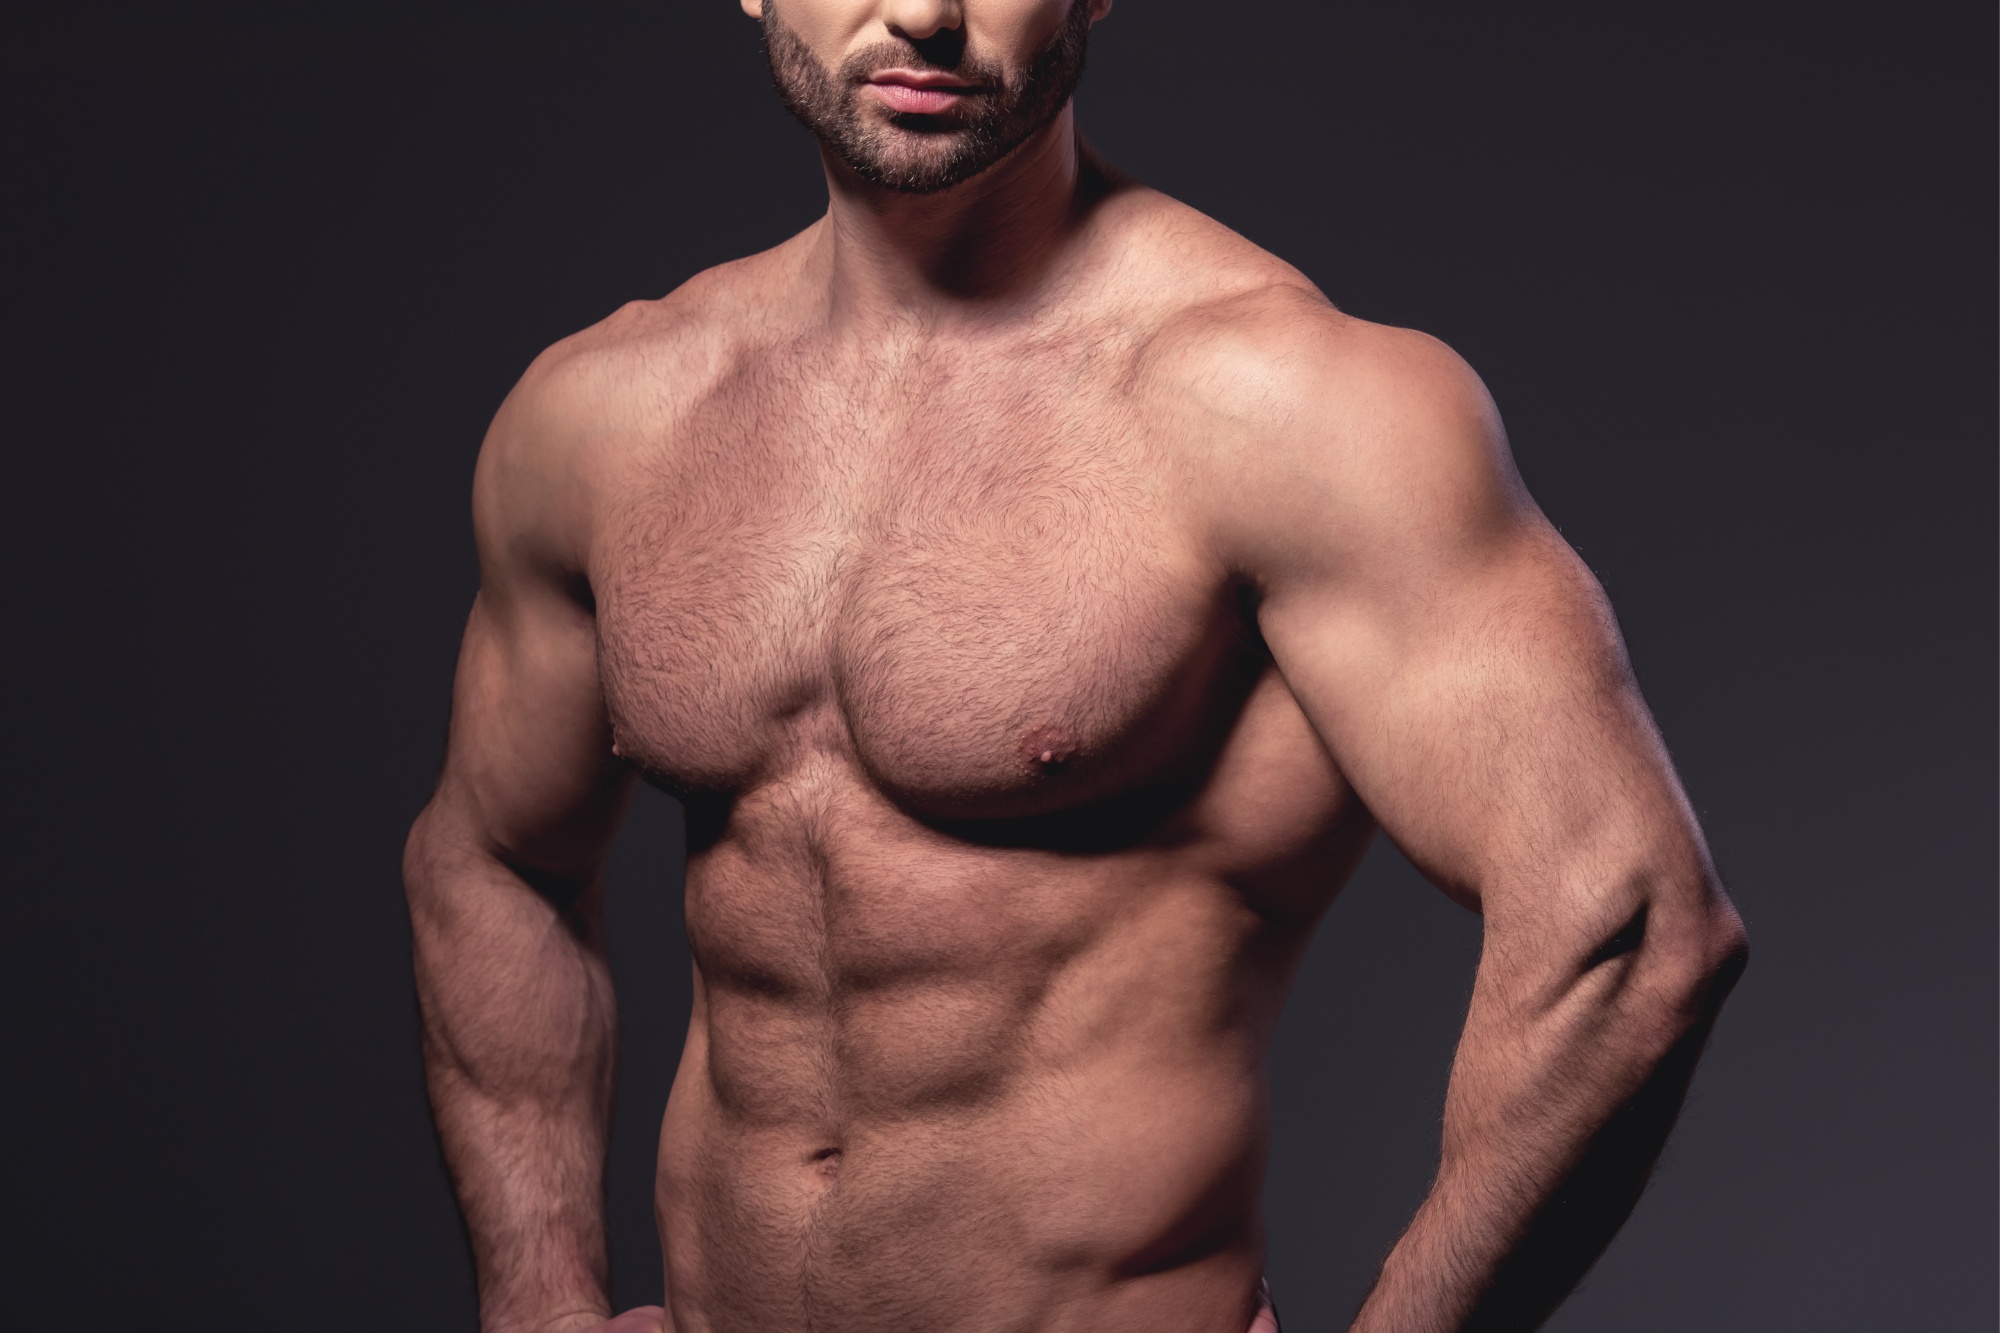 Picture of a musclebound six-pack man with his top off